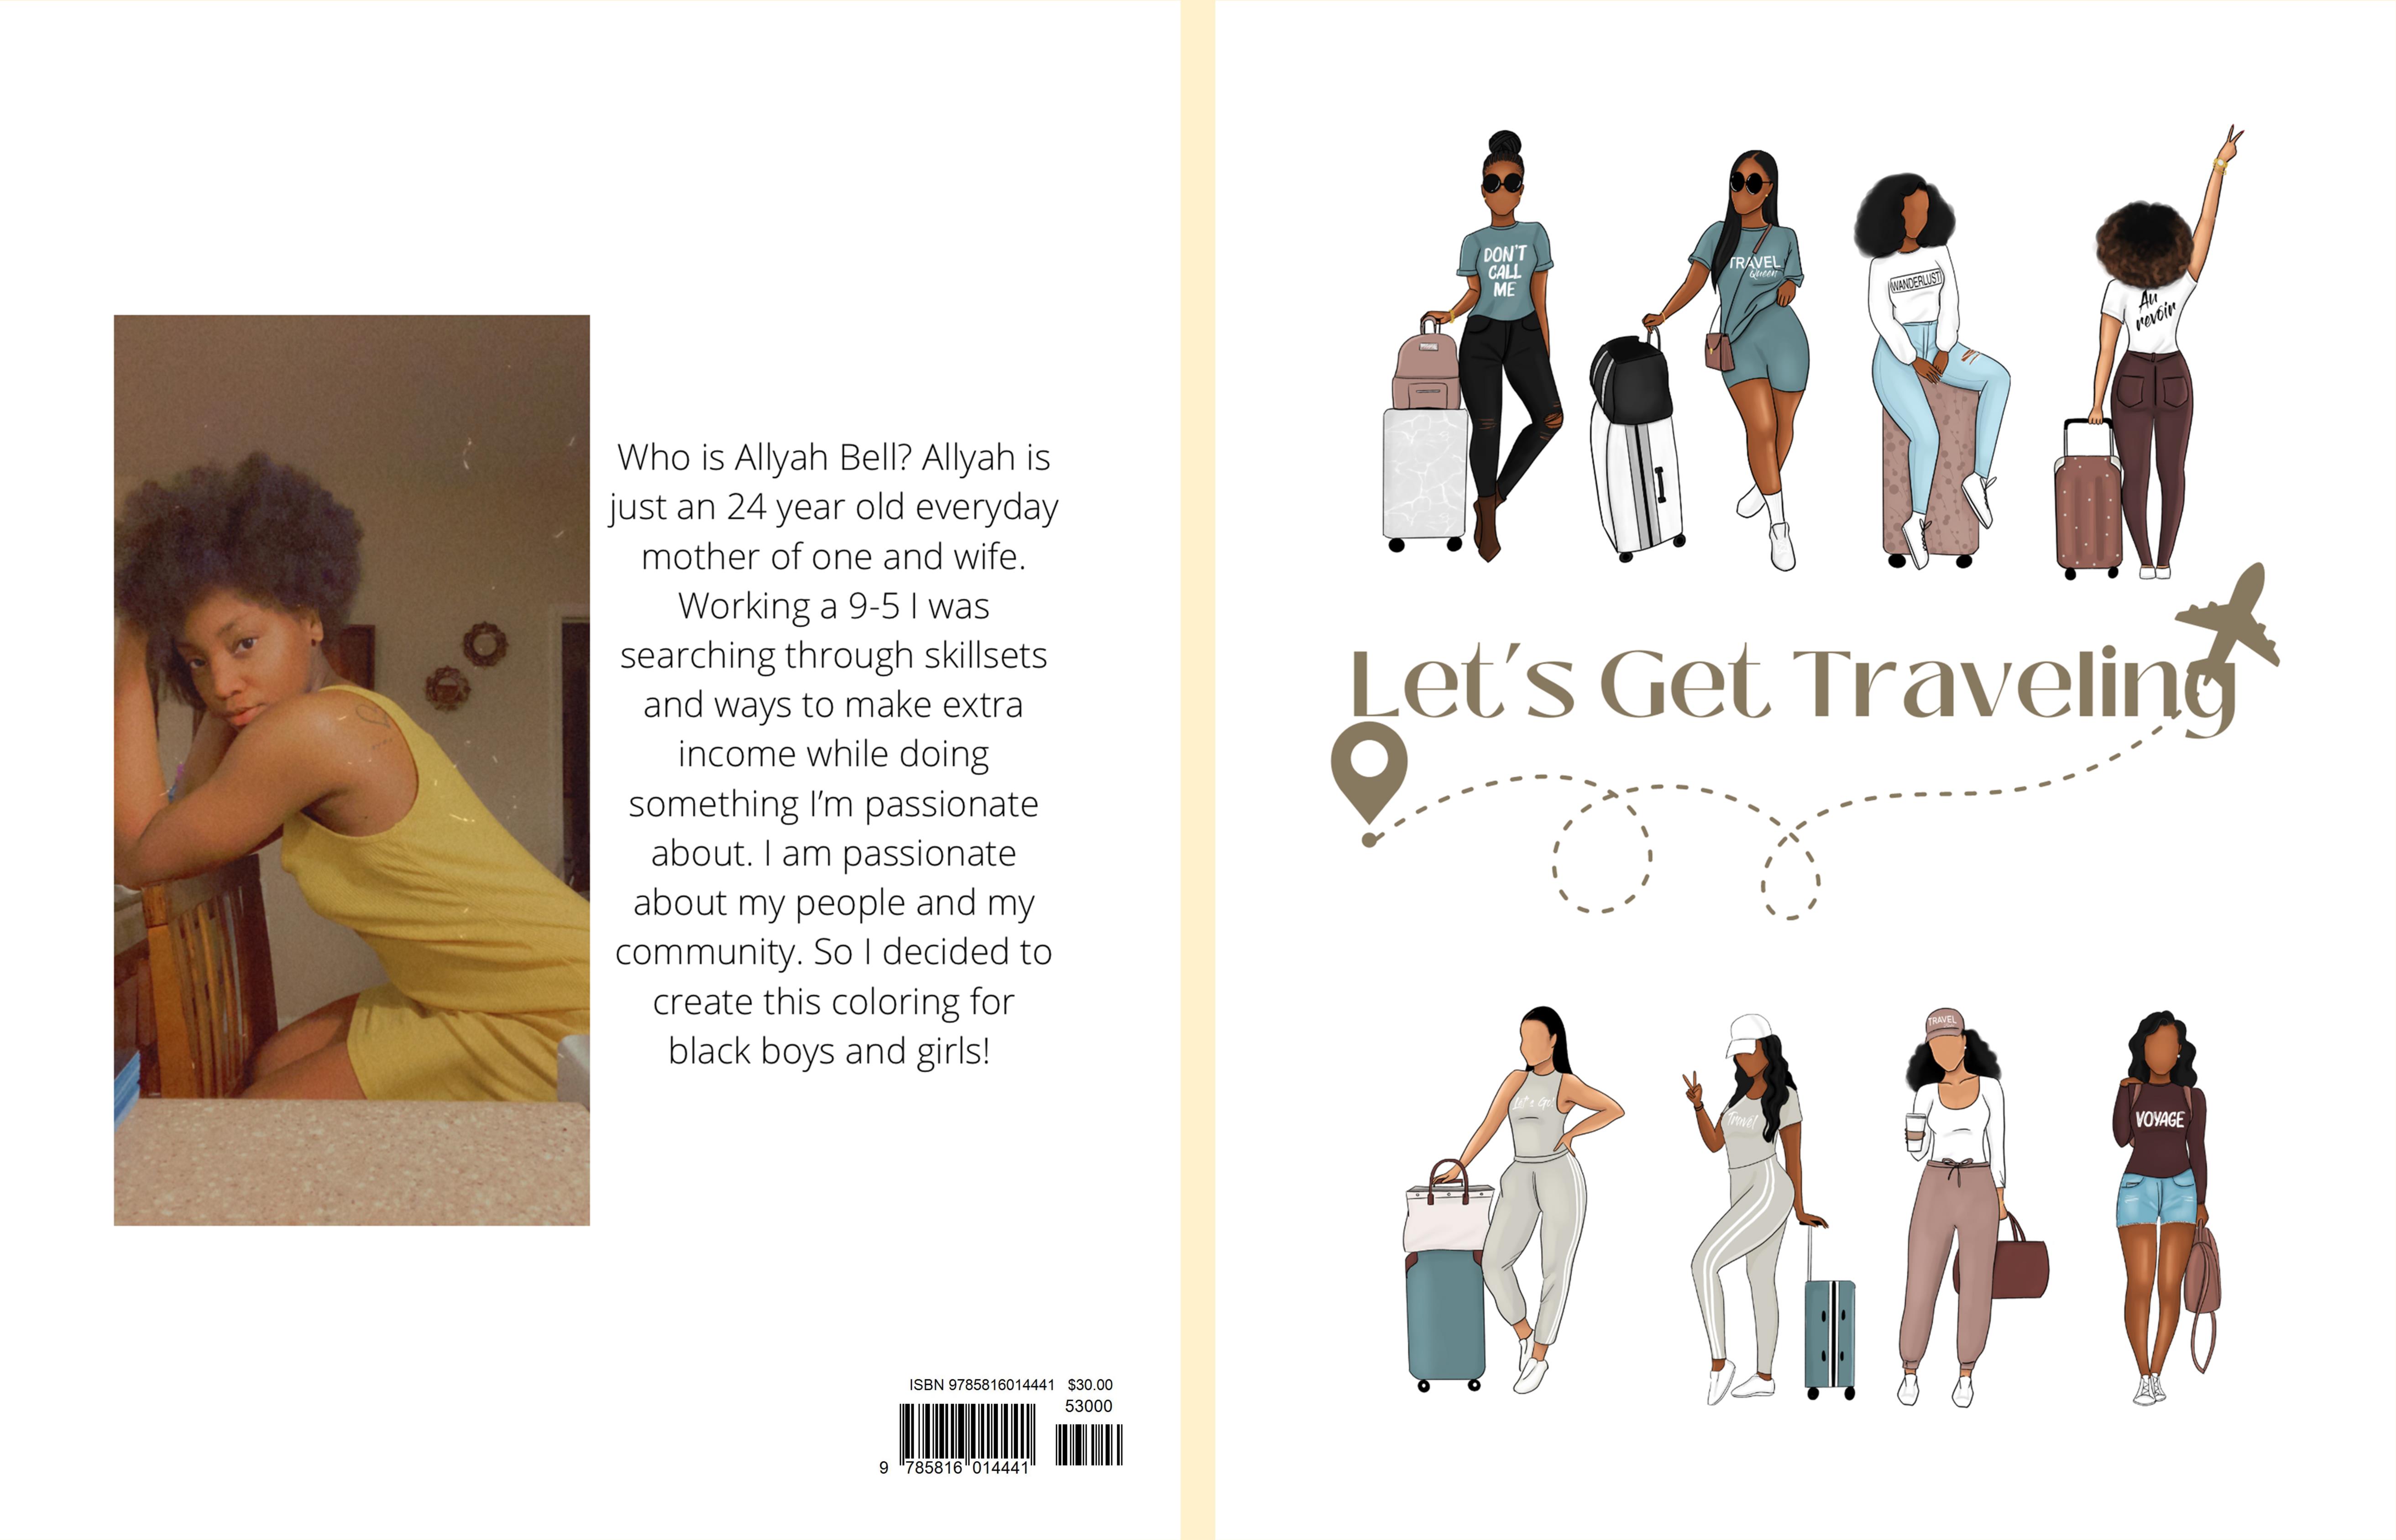 Let’s Get Traveling: Travel Journal cover image